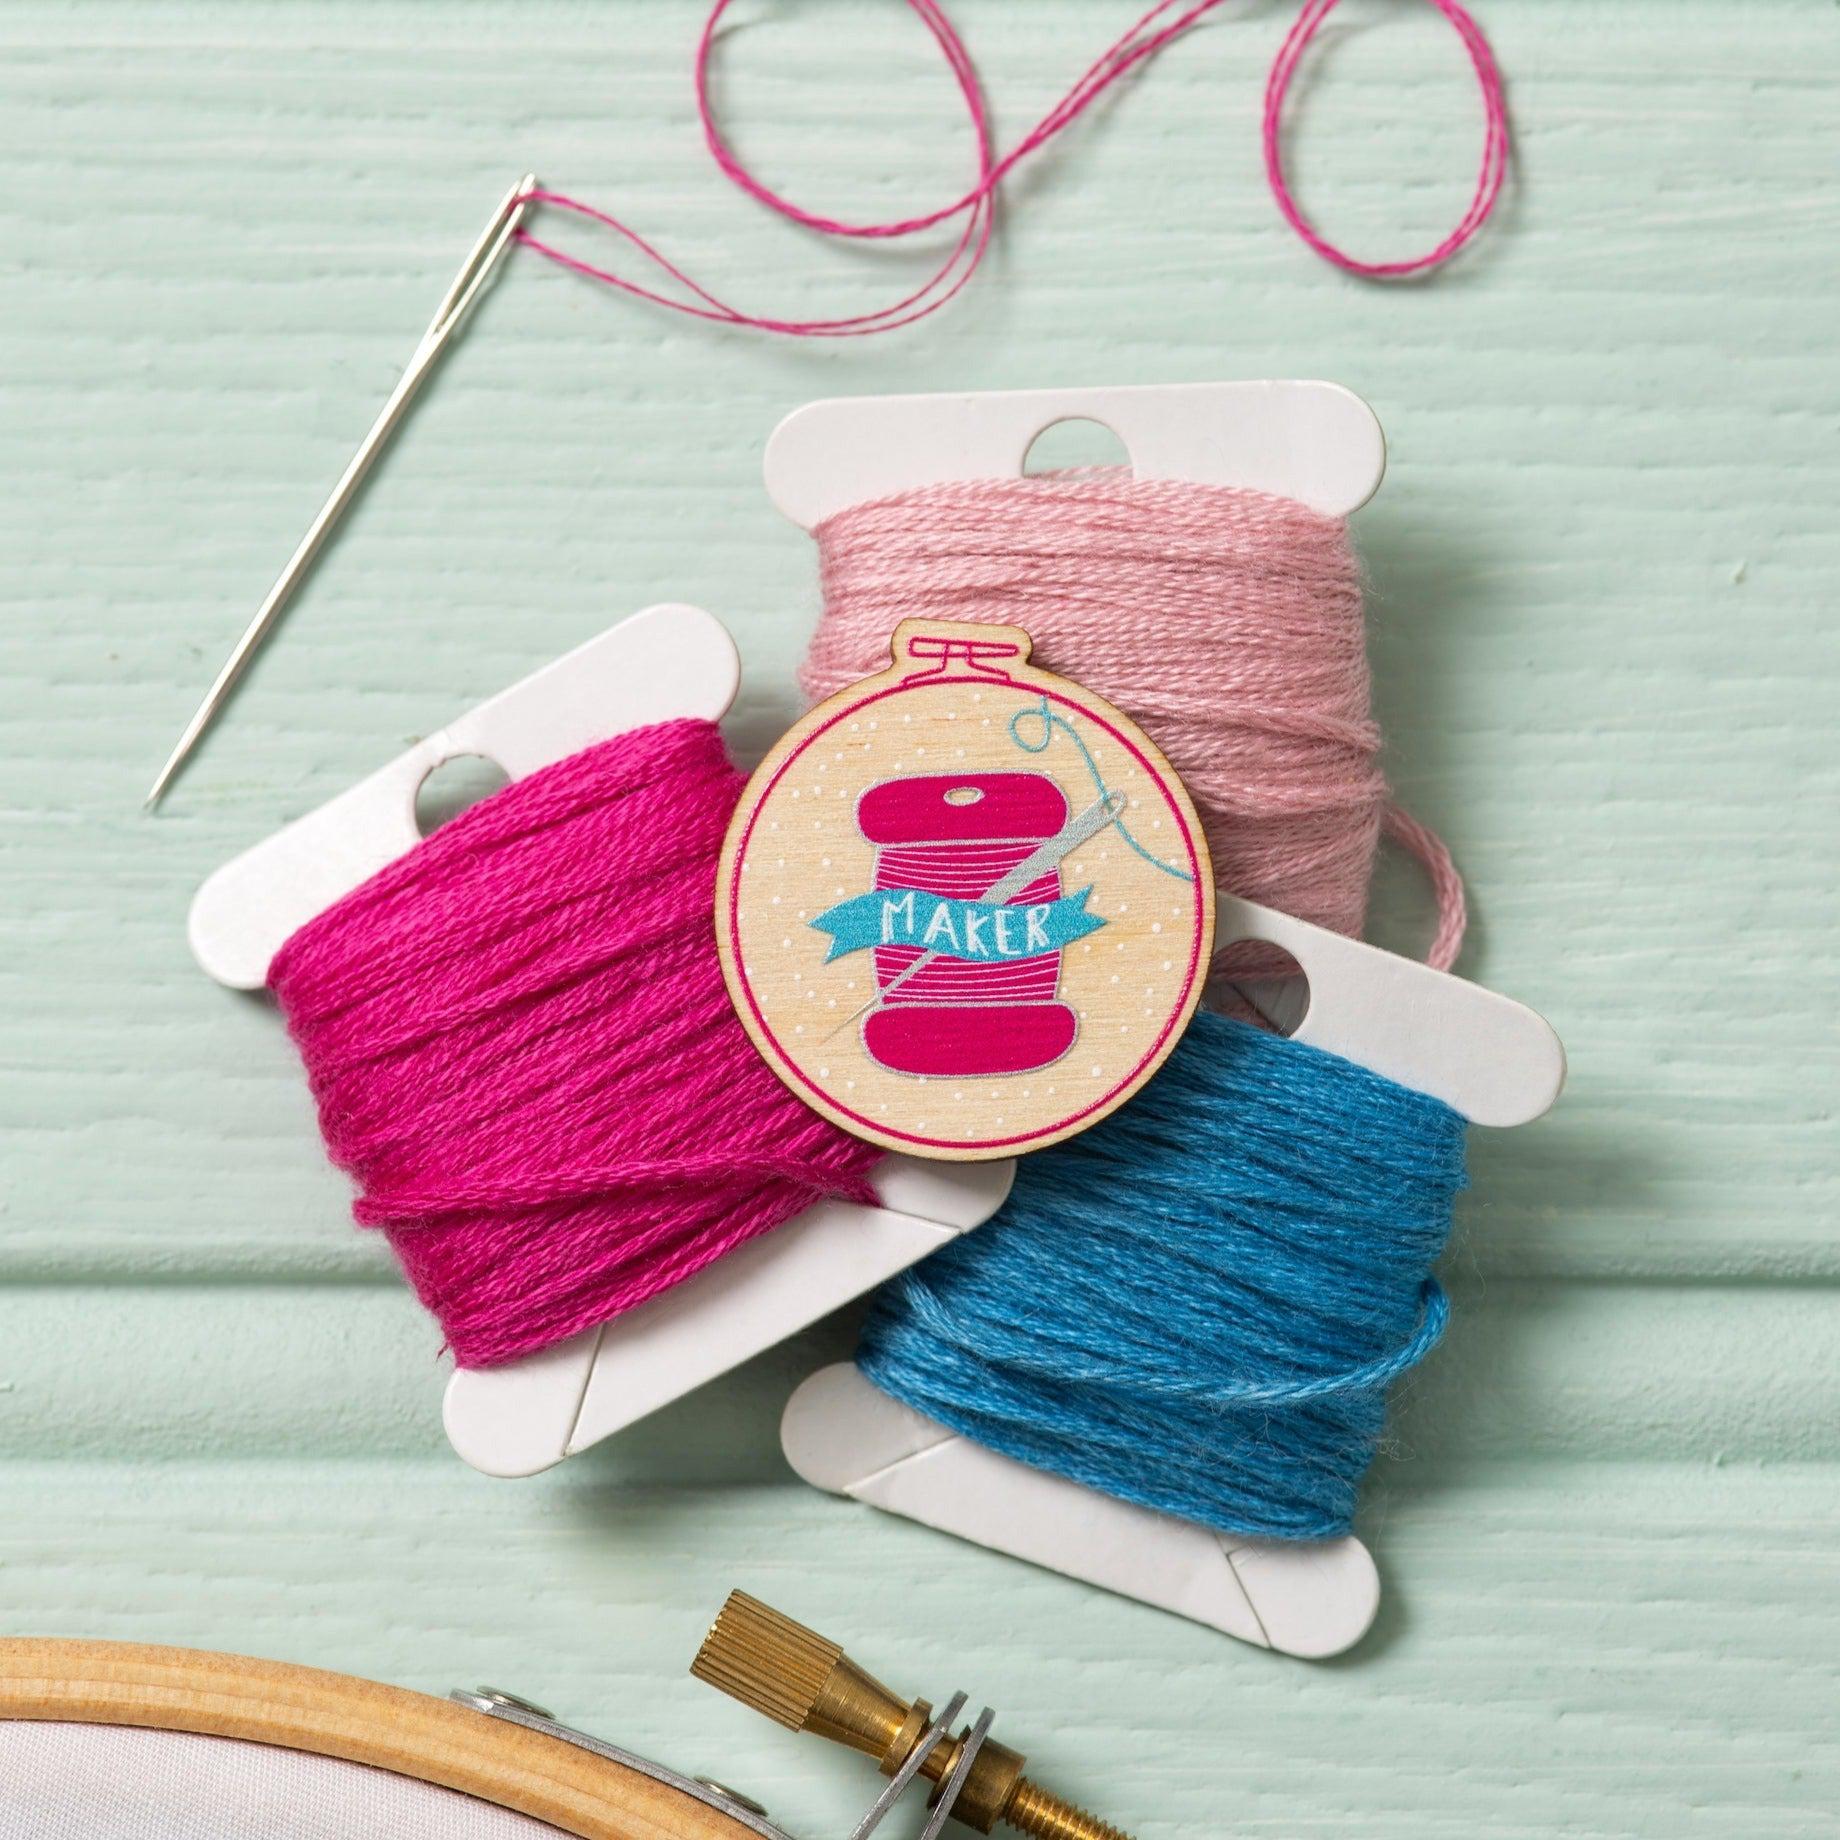 35 of the best needle minders - Gathered